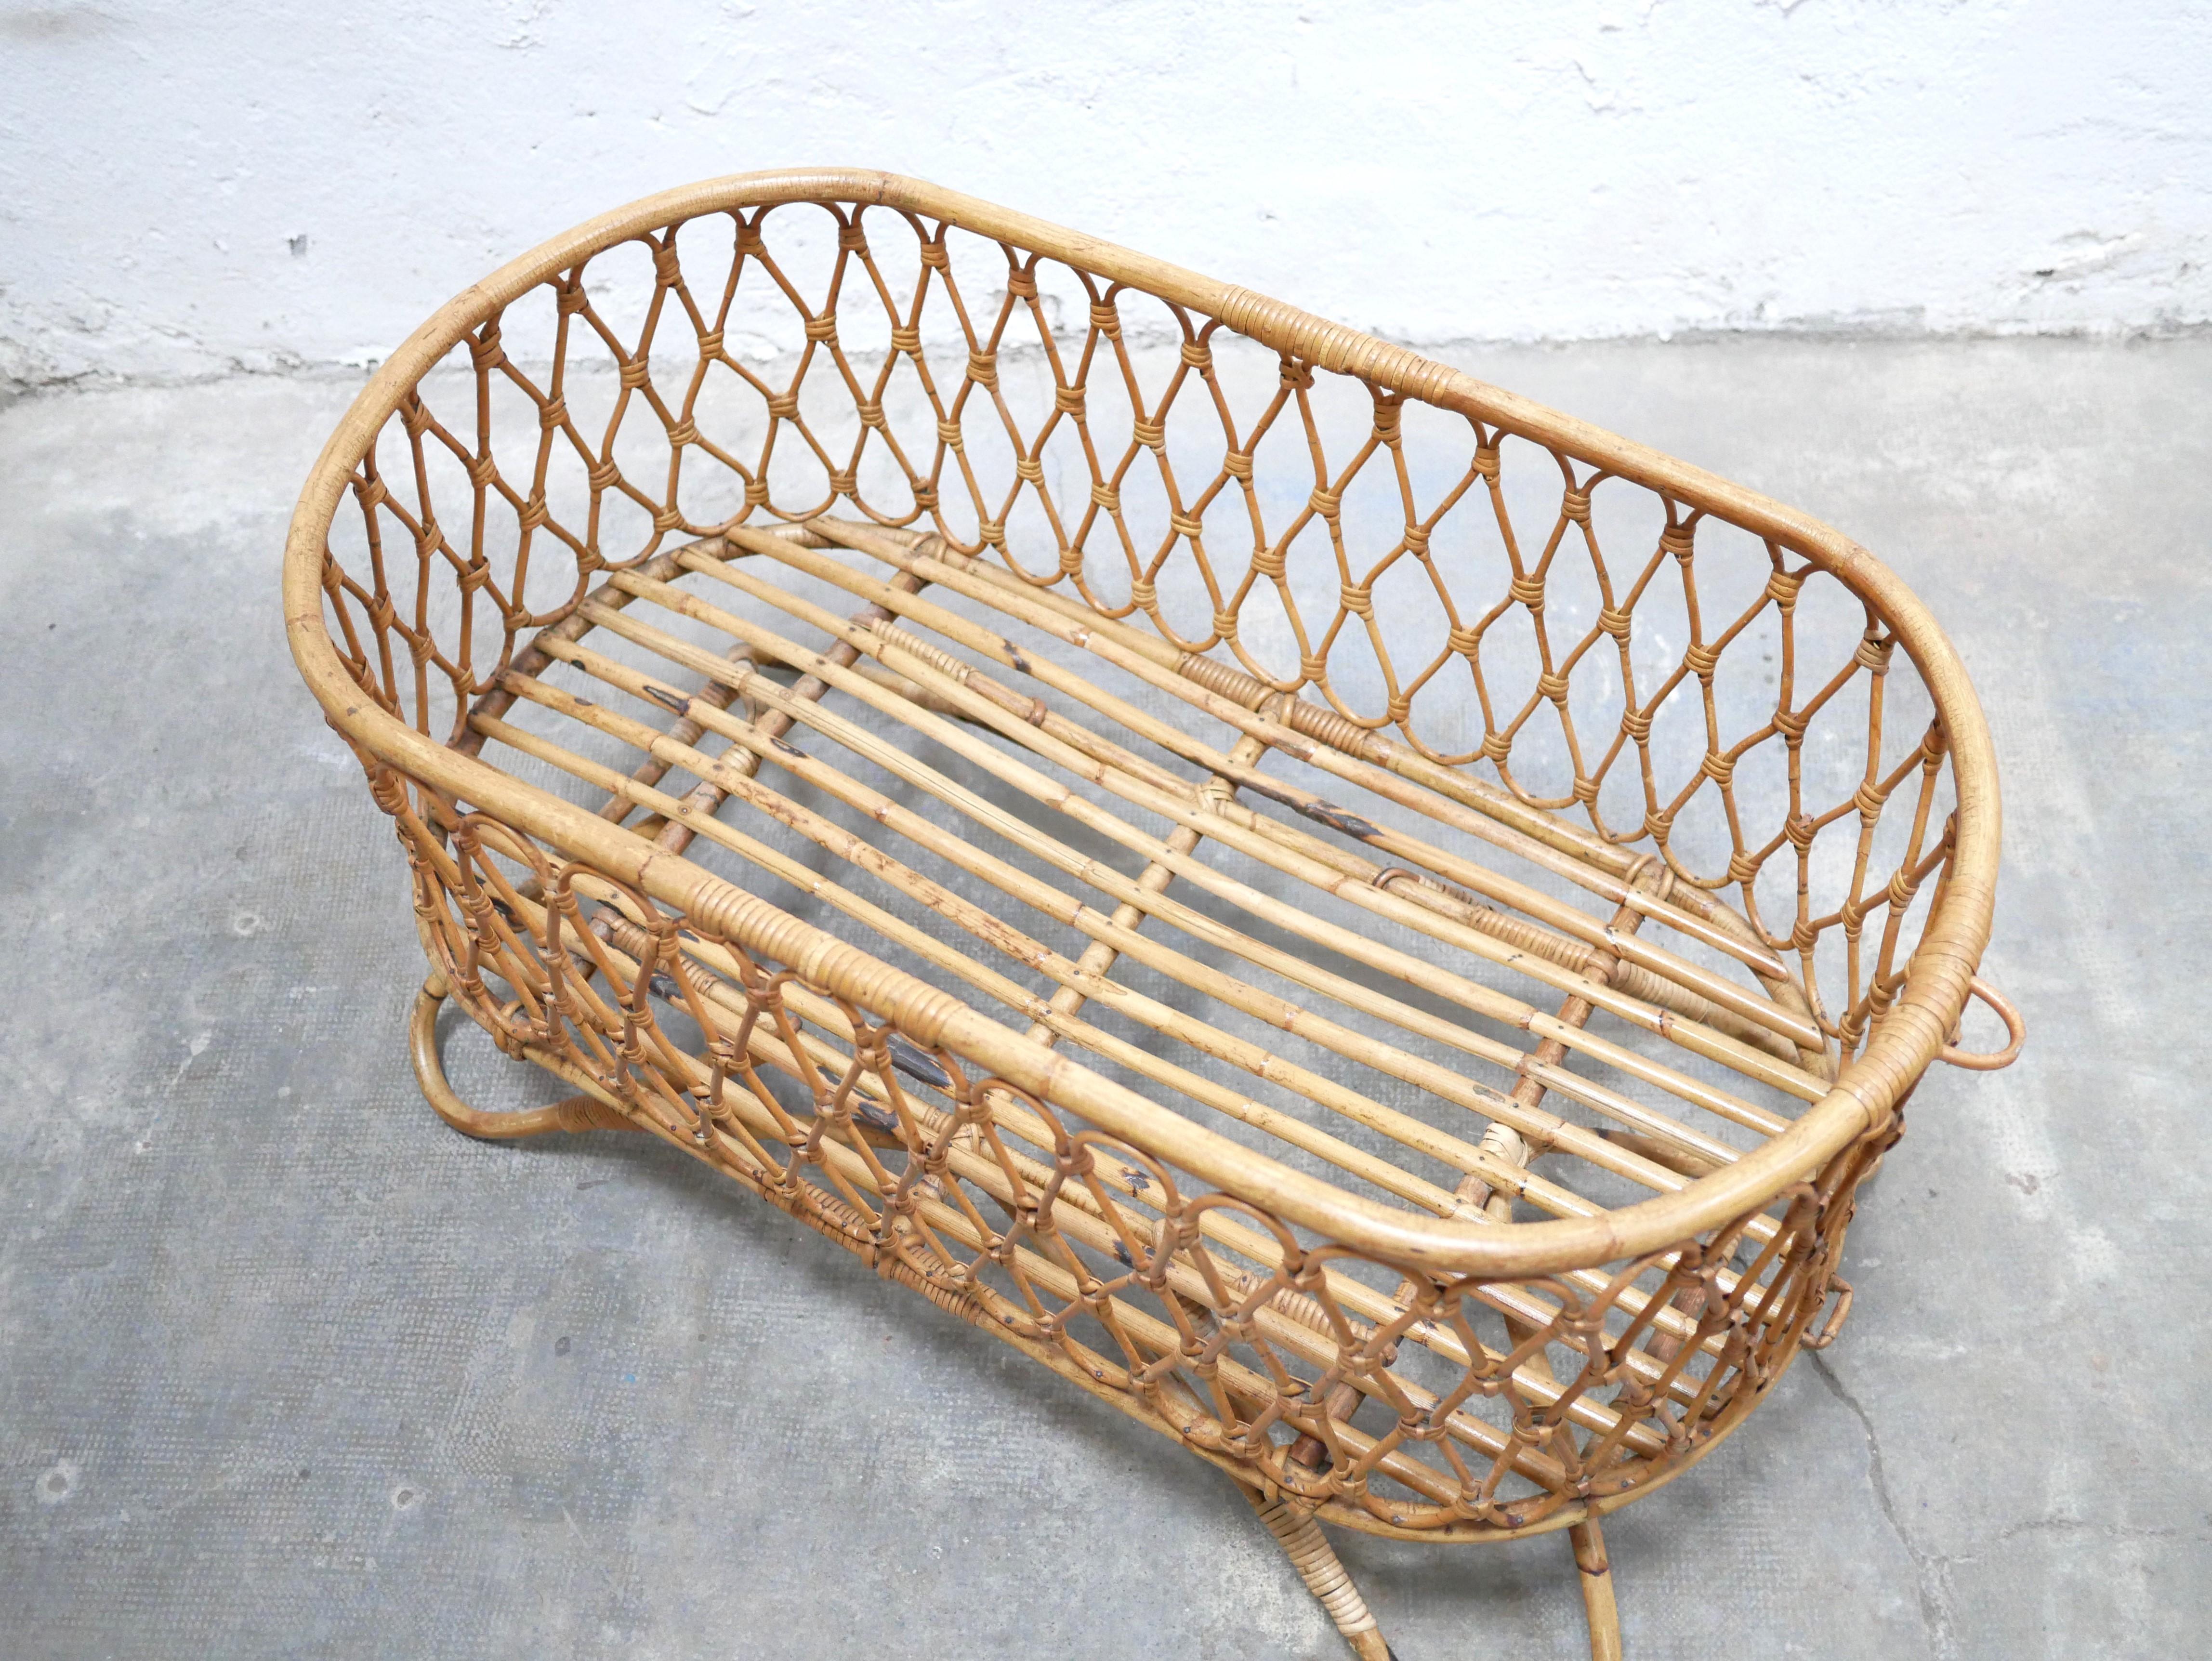 Rattan cradle dating from the 60s.

Rattan is bright, warm and of good quality. Its curves give it a lot of softness and harmony. Solid, stable, practical and pretty, it will bring a vintage and bohemian touch to a child's bedroom.
 
Good condition,